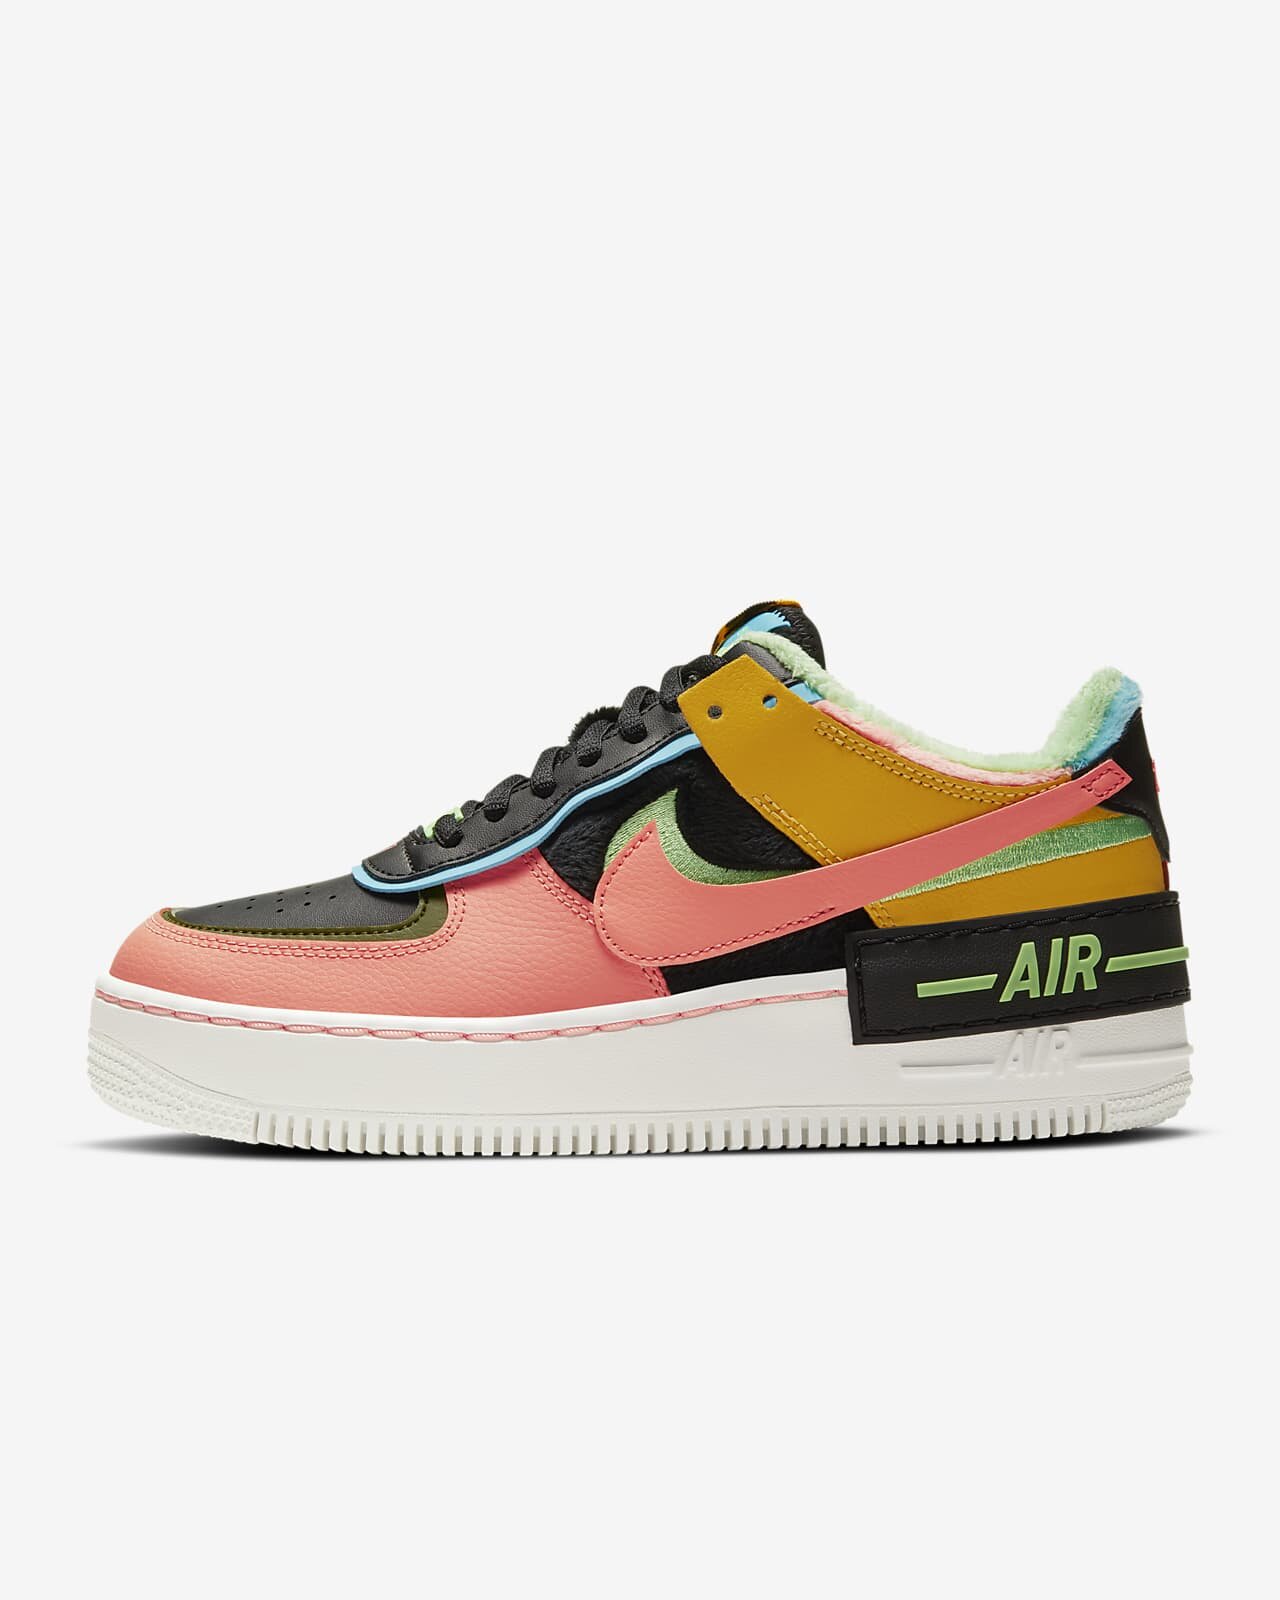 Nike Air Force One - A History — The Sporting Blog صقر كرتون